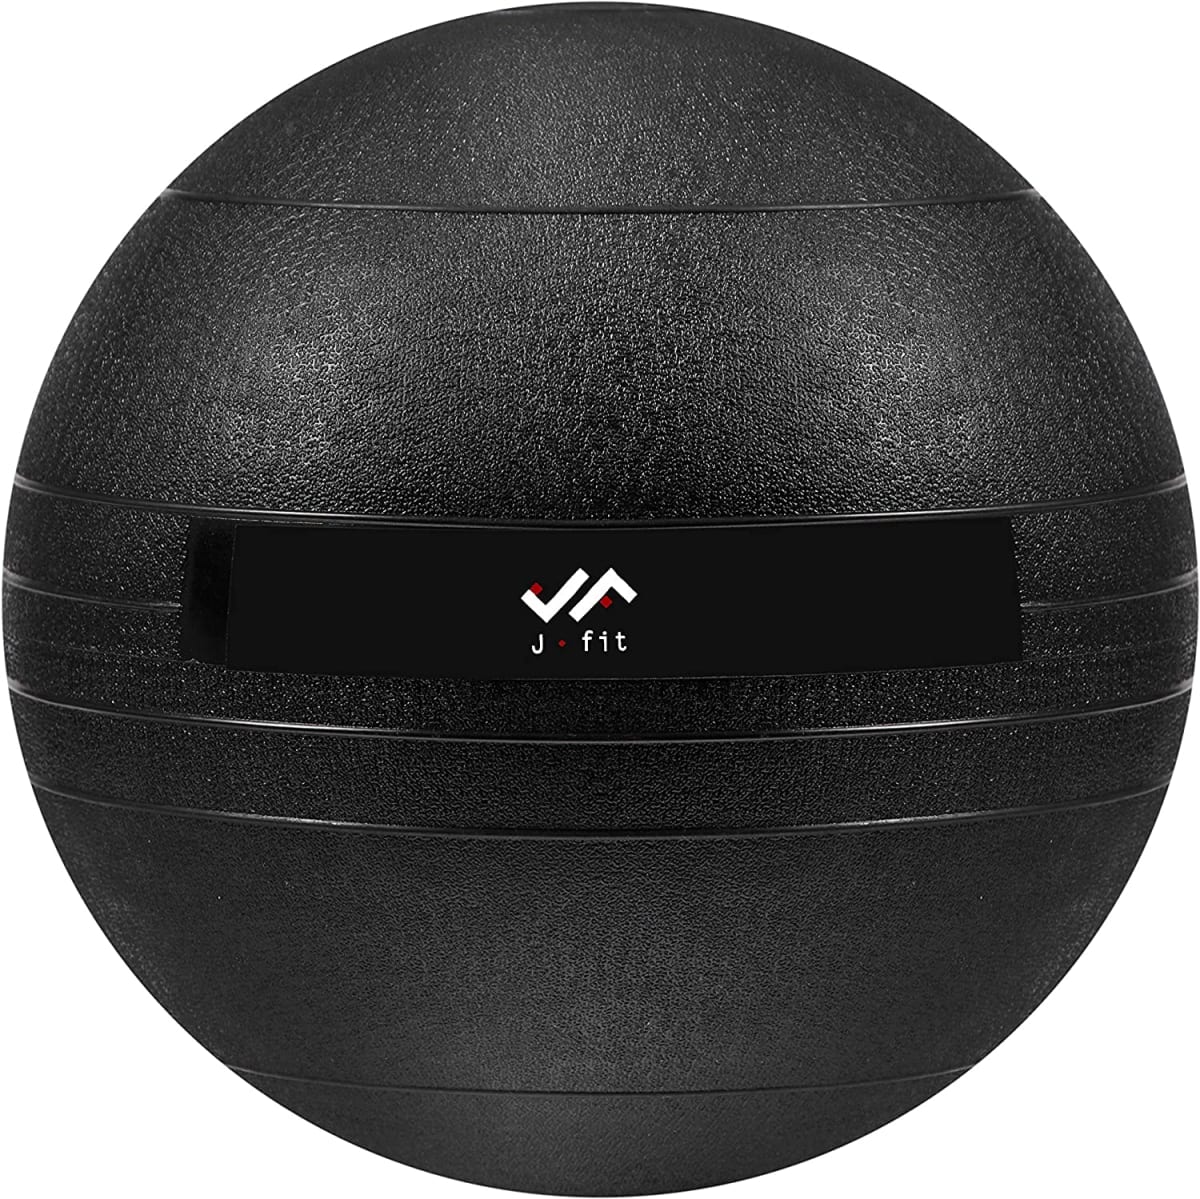 Dead Weight Slam Ball for Strength and Conditioning WODs, Plyometric and Core Training, and Cardio Workouts